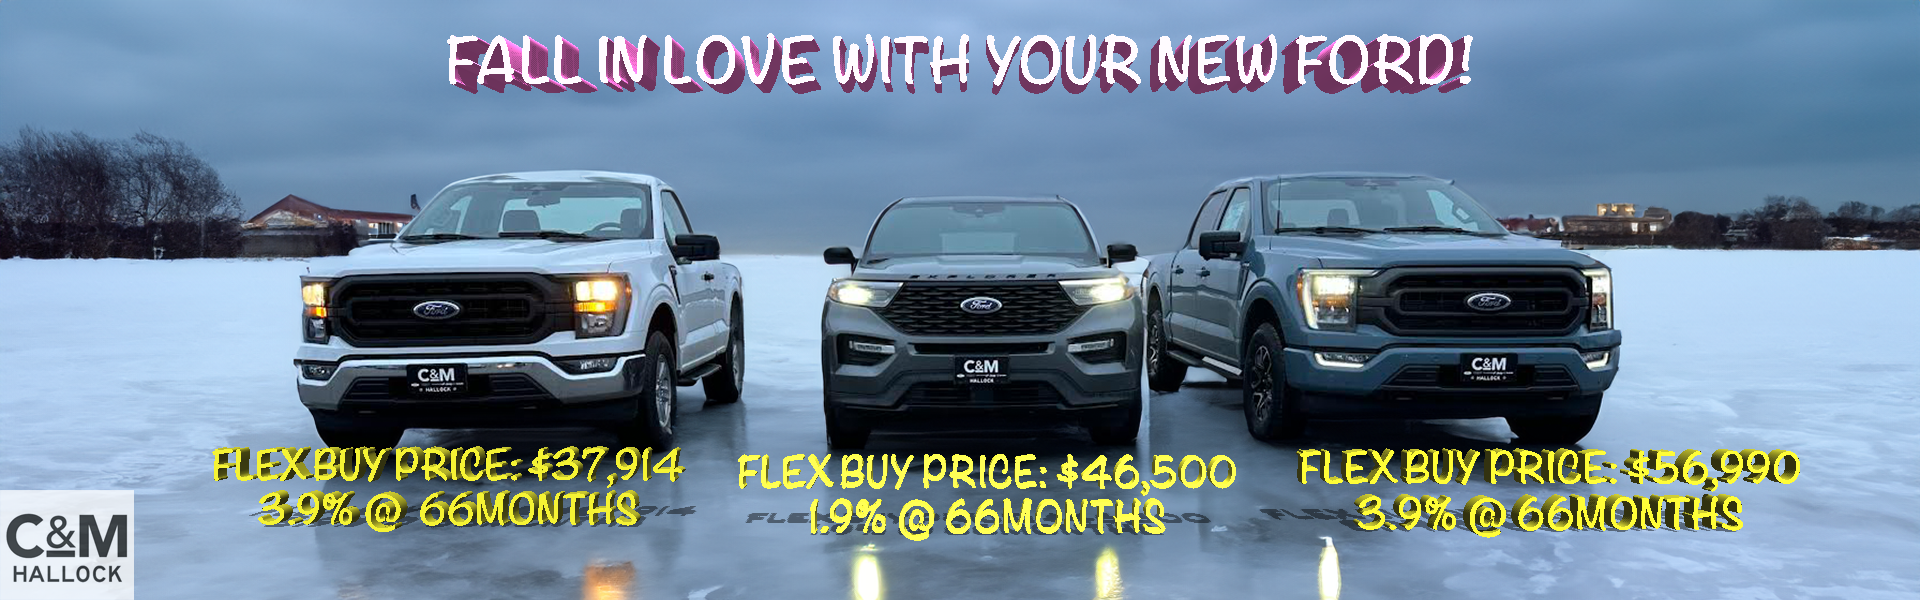 Fall in love with your new Ford